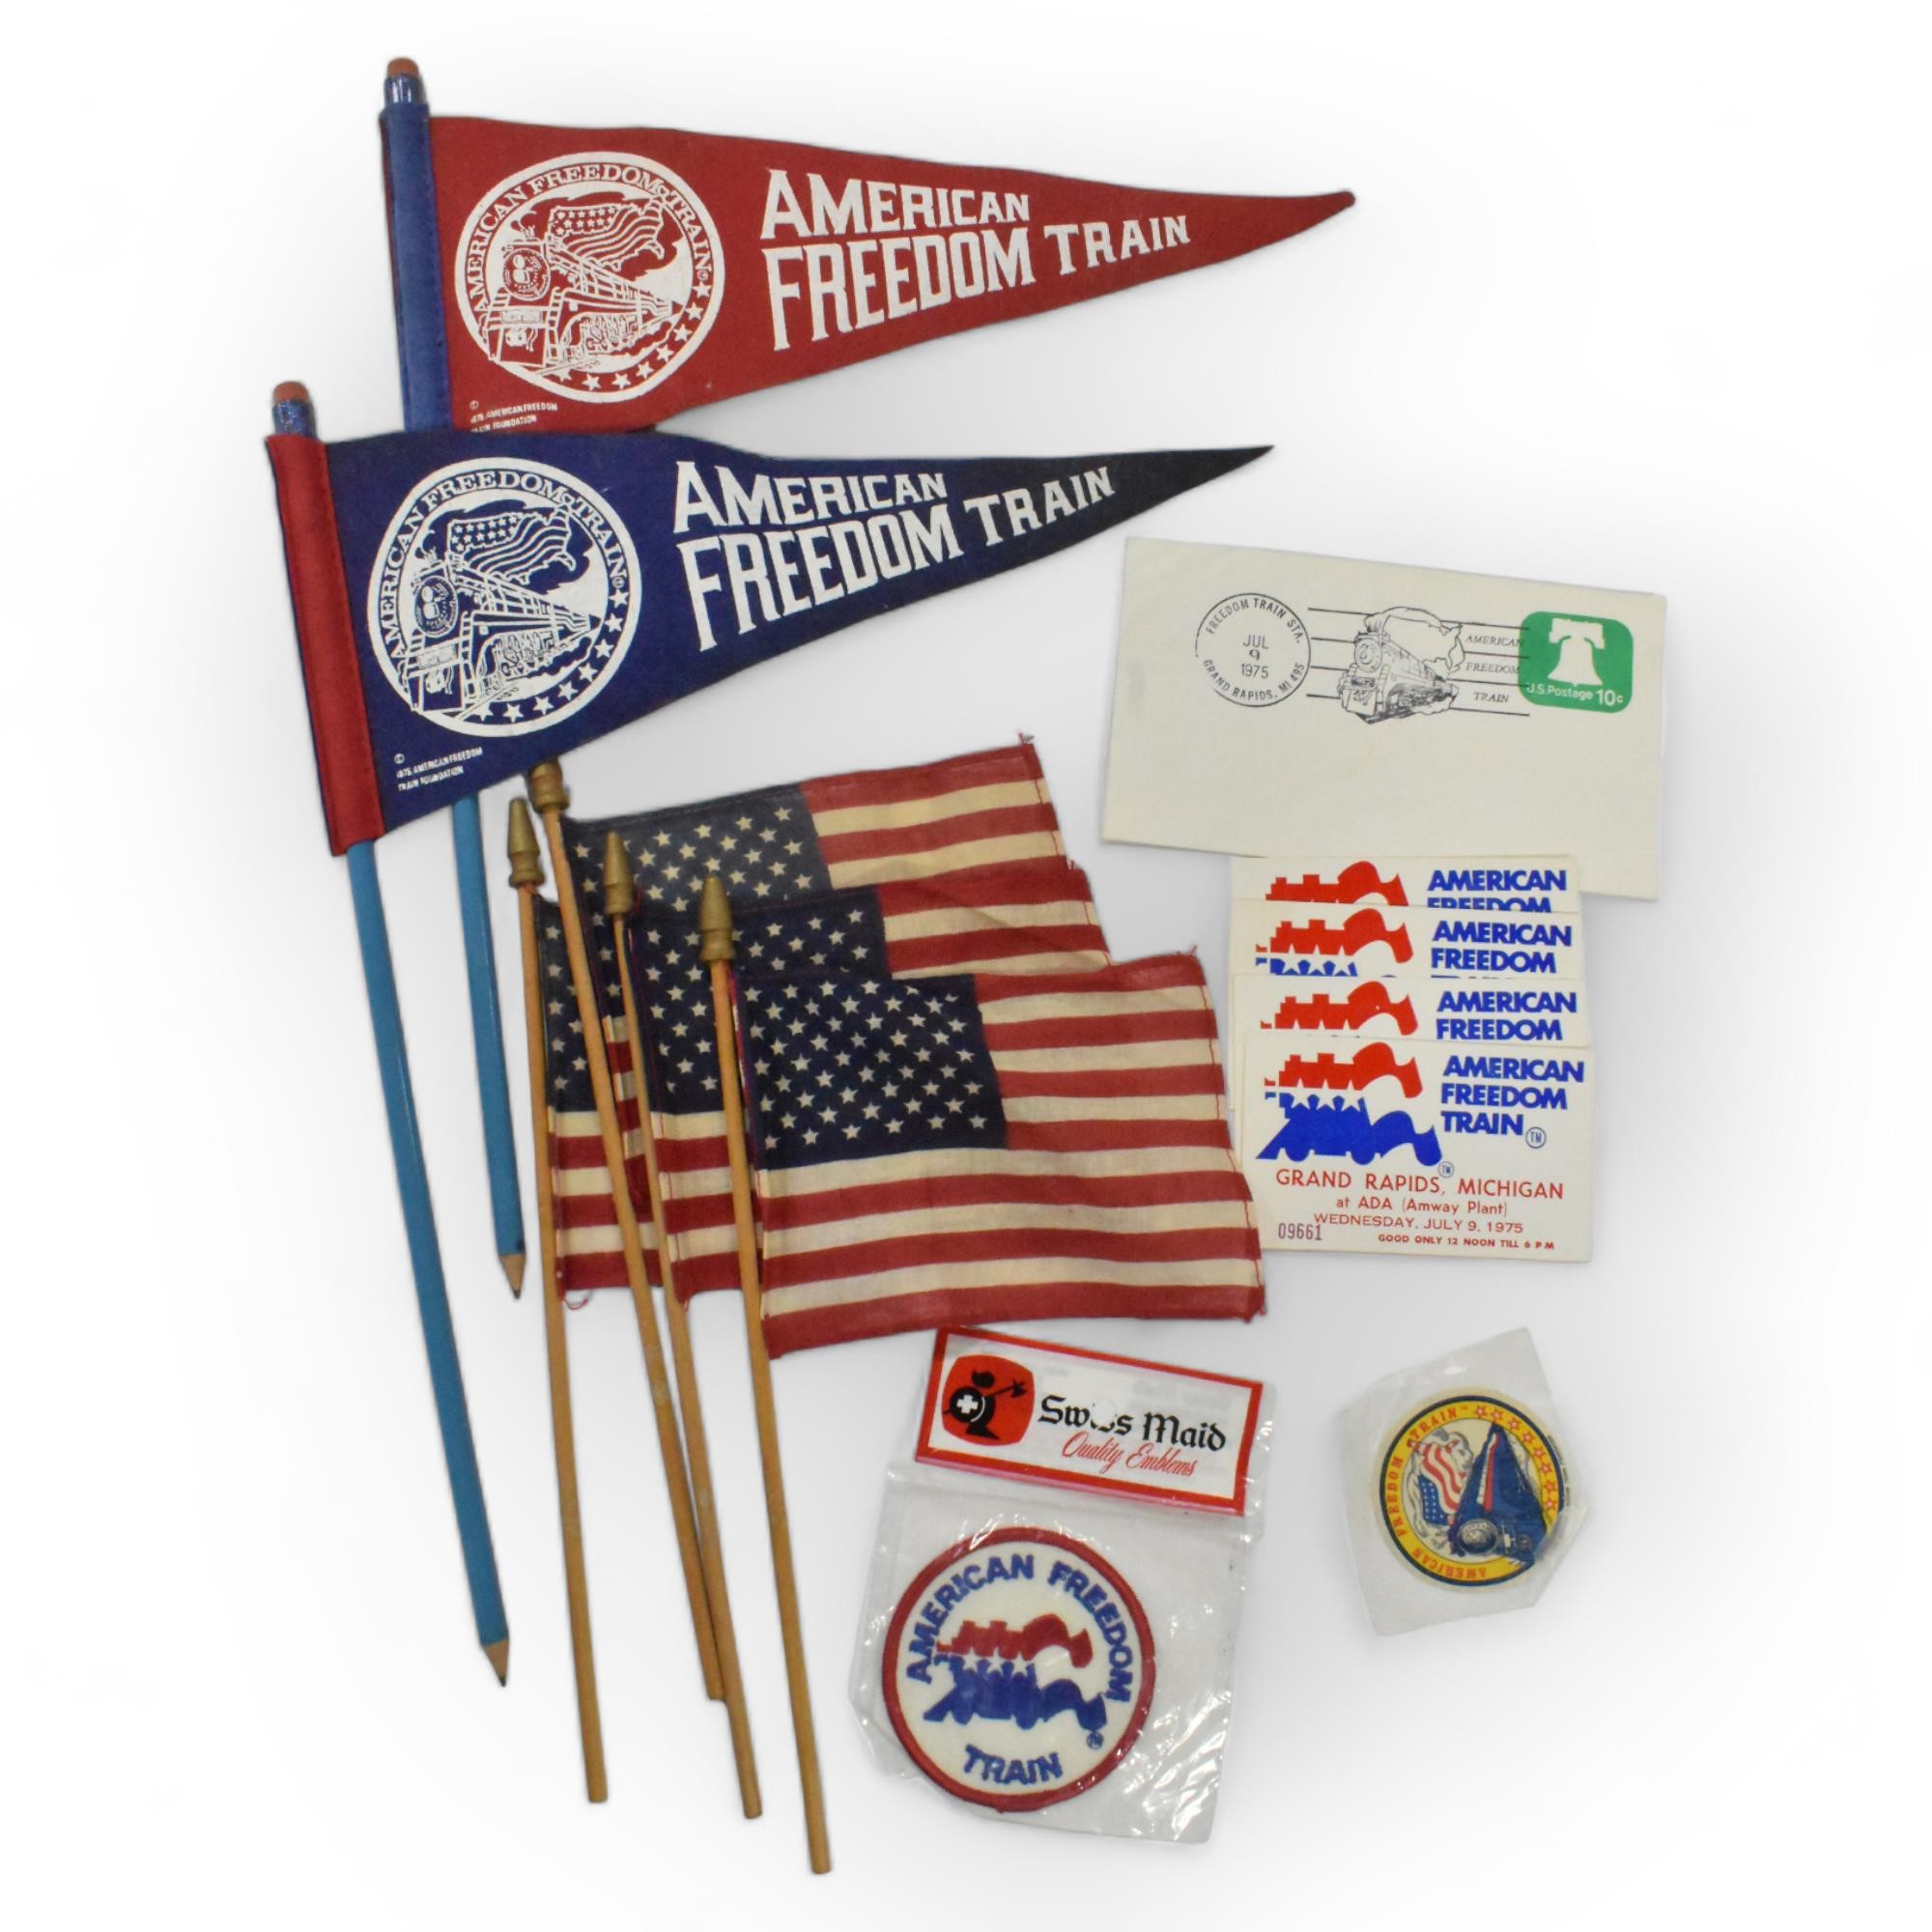 American Freedom Train Pennets, Flags, Patches